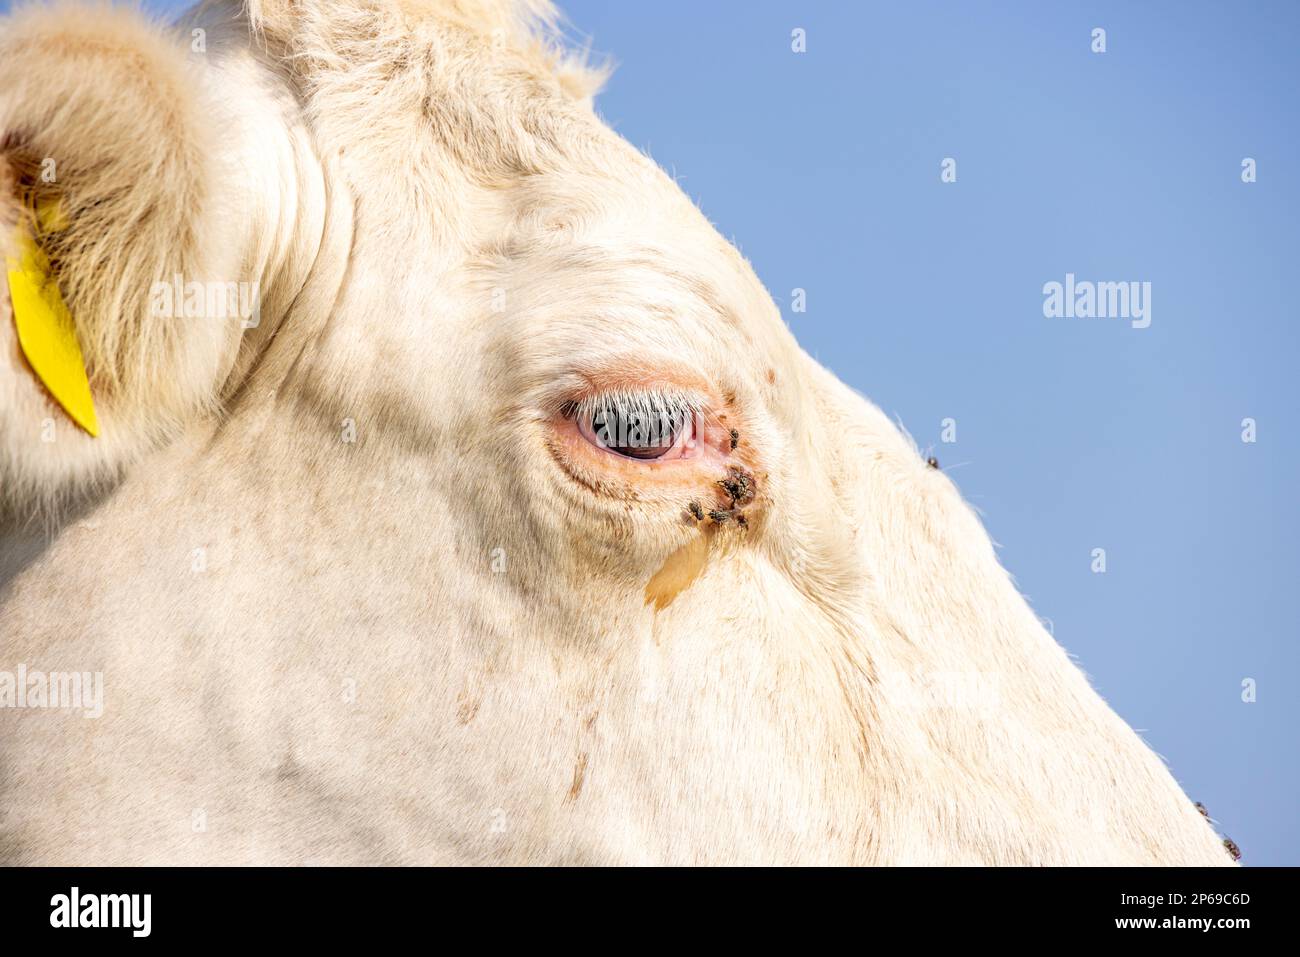 Cow eye close up, a dairy white one, looking calm and tranquil, blue background Stock Photo